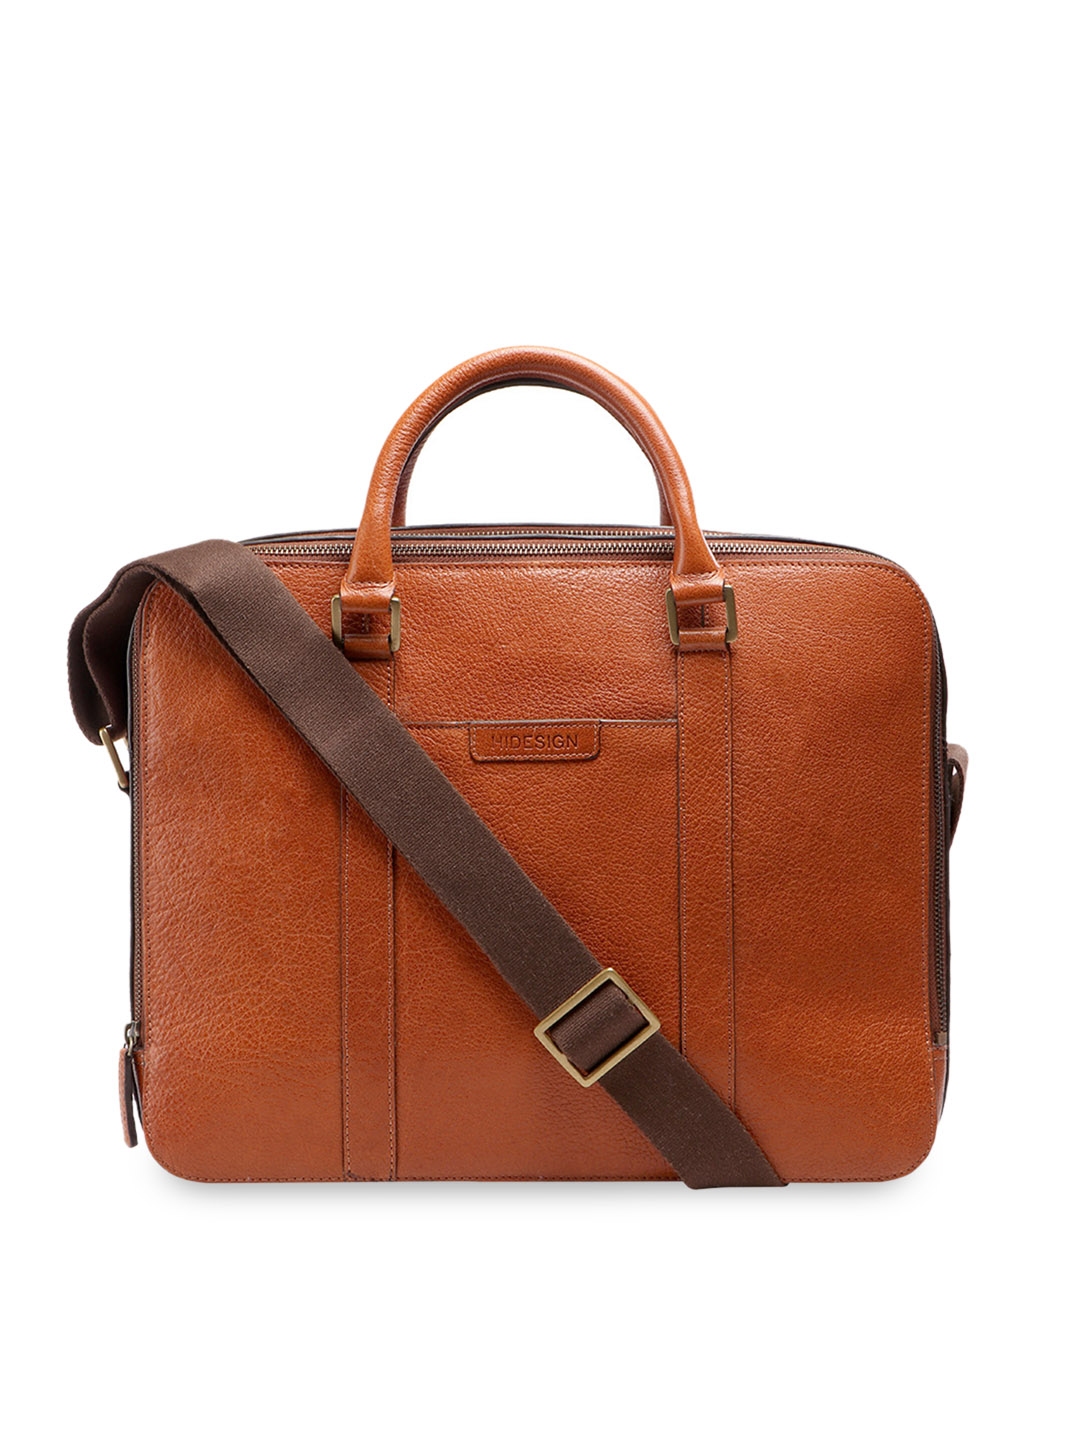 Hidesign 18 Ltrs Tan Laptop Bag (Hidesign Castello Men's Laptop Bag - Tan)  : Amazon.in: Bags, Wallets and Luggage